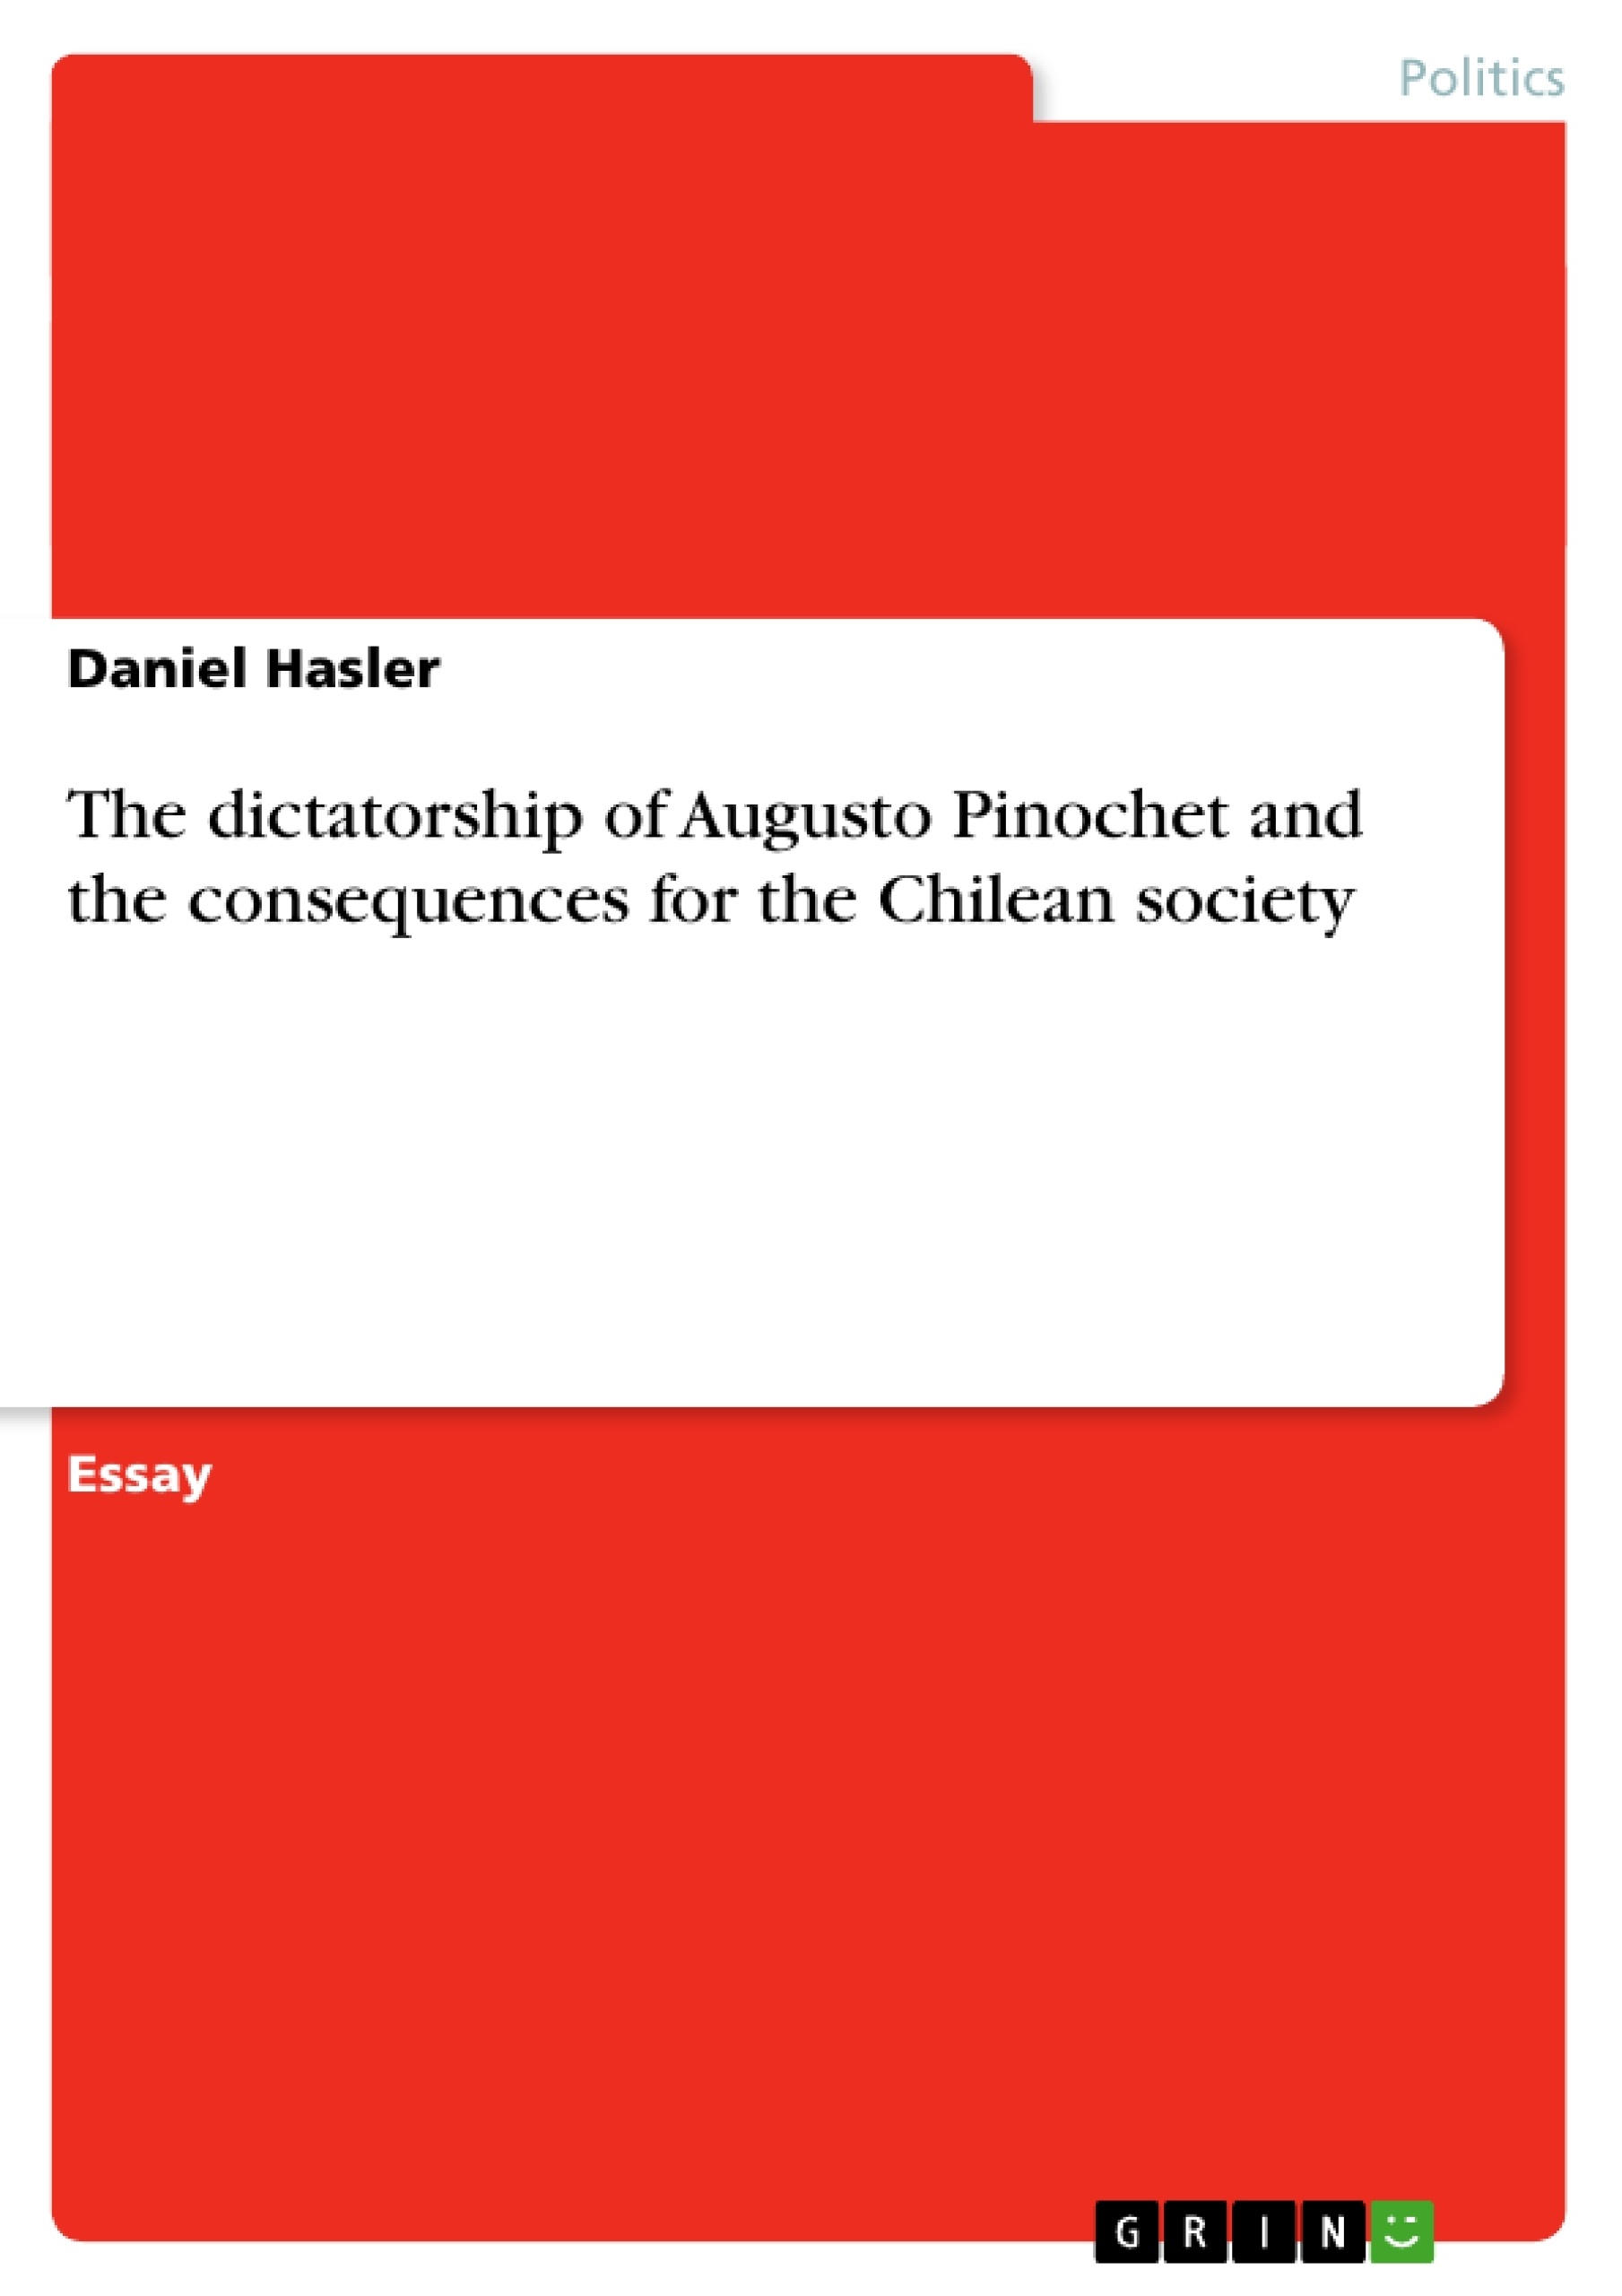 Titel: The dictatorship of Augusto Pinochet and the consequences for the Chilean society